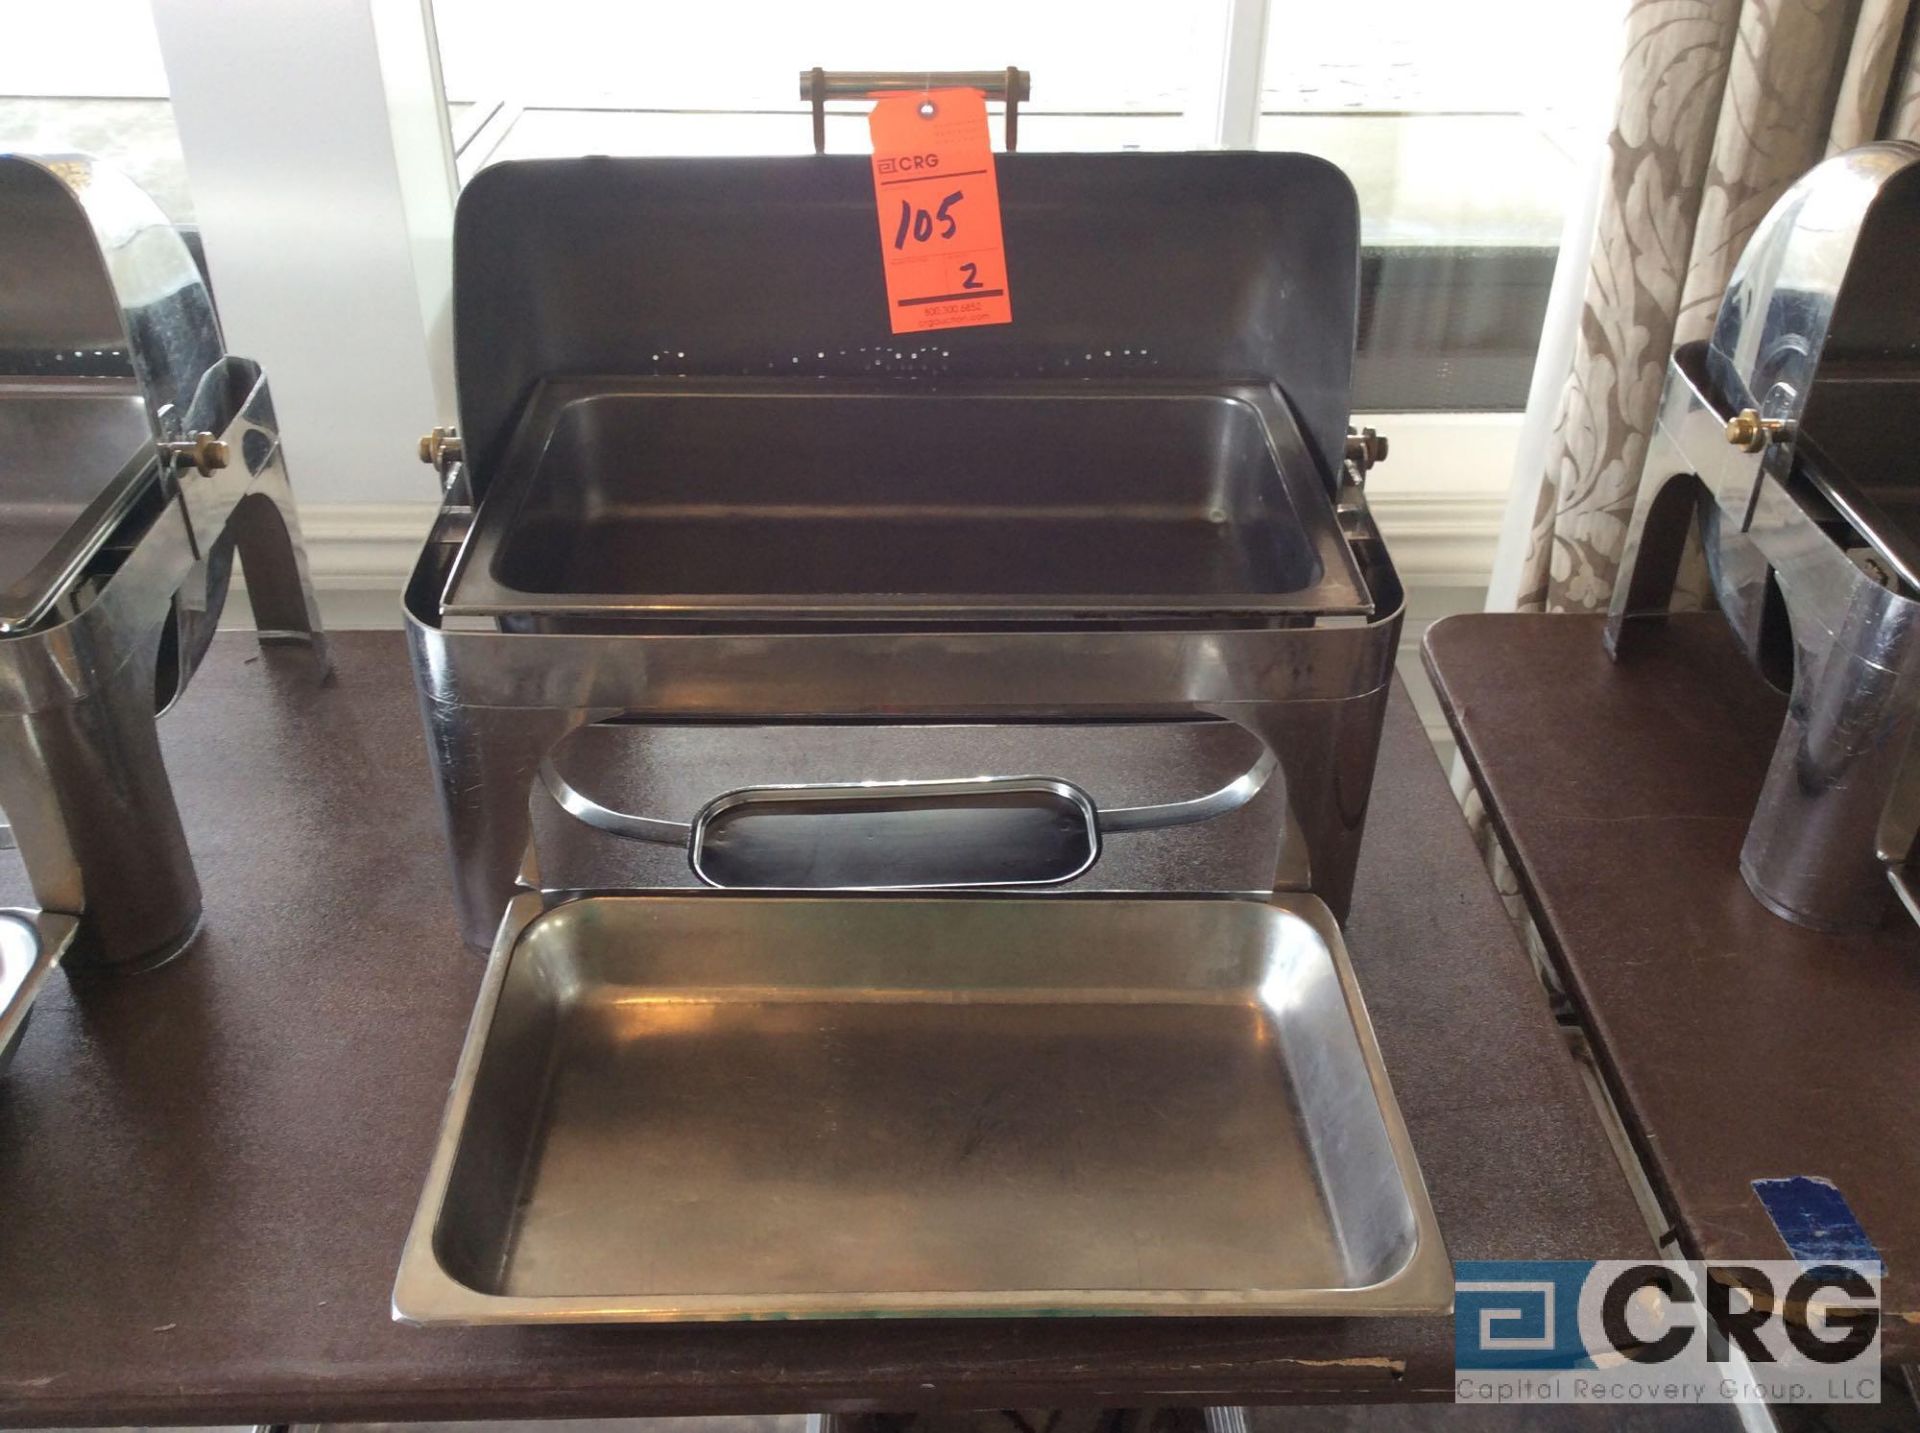 Lot of (2) commercial steel grade roll top chafing dishes, 27 X 19 X 22 inch tall with food and - Image 2 of 2